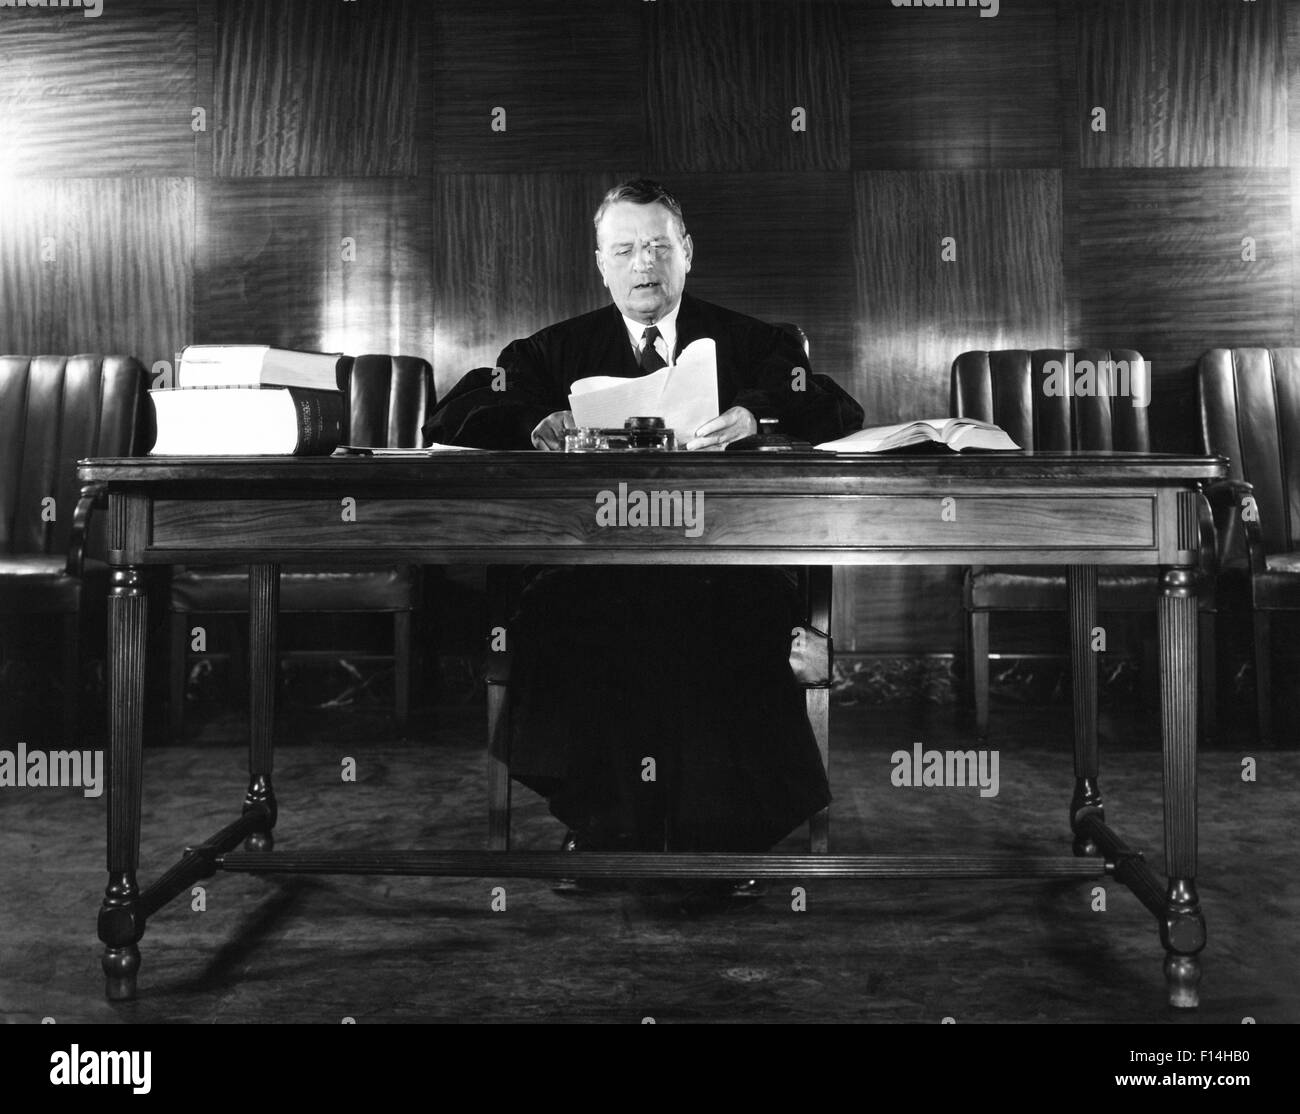 1940s MAN JUDGE READING PAPERS WEARING ROBE SEATED AT DESK Stock Photo